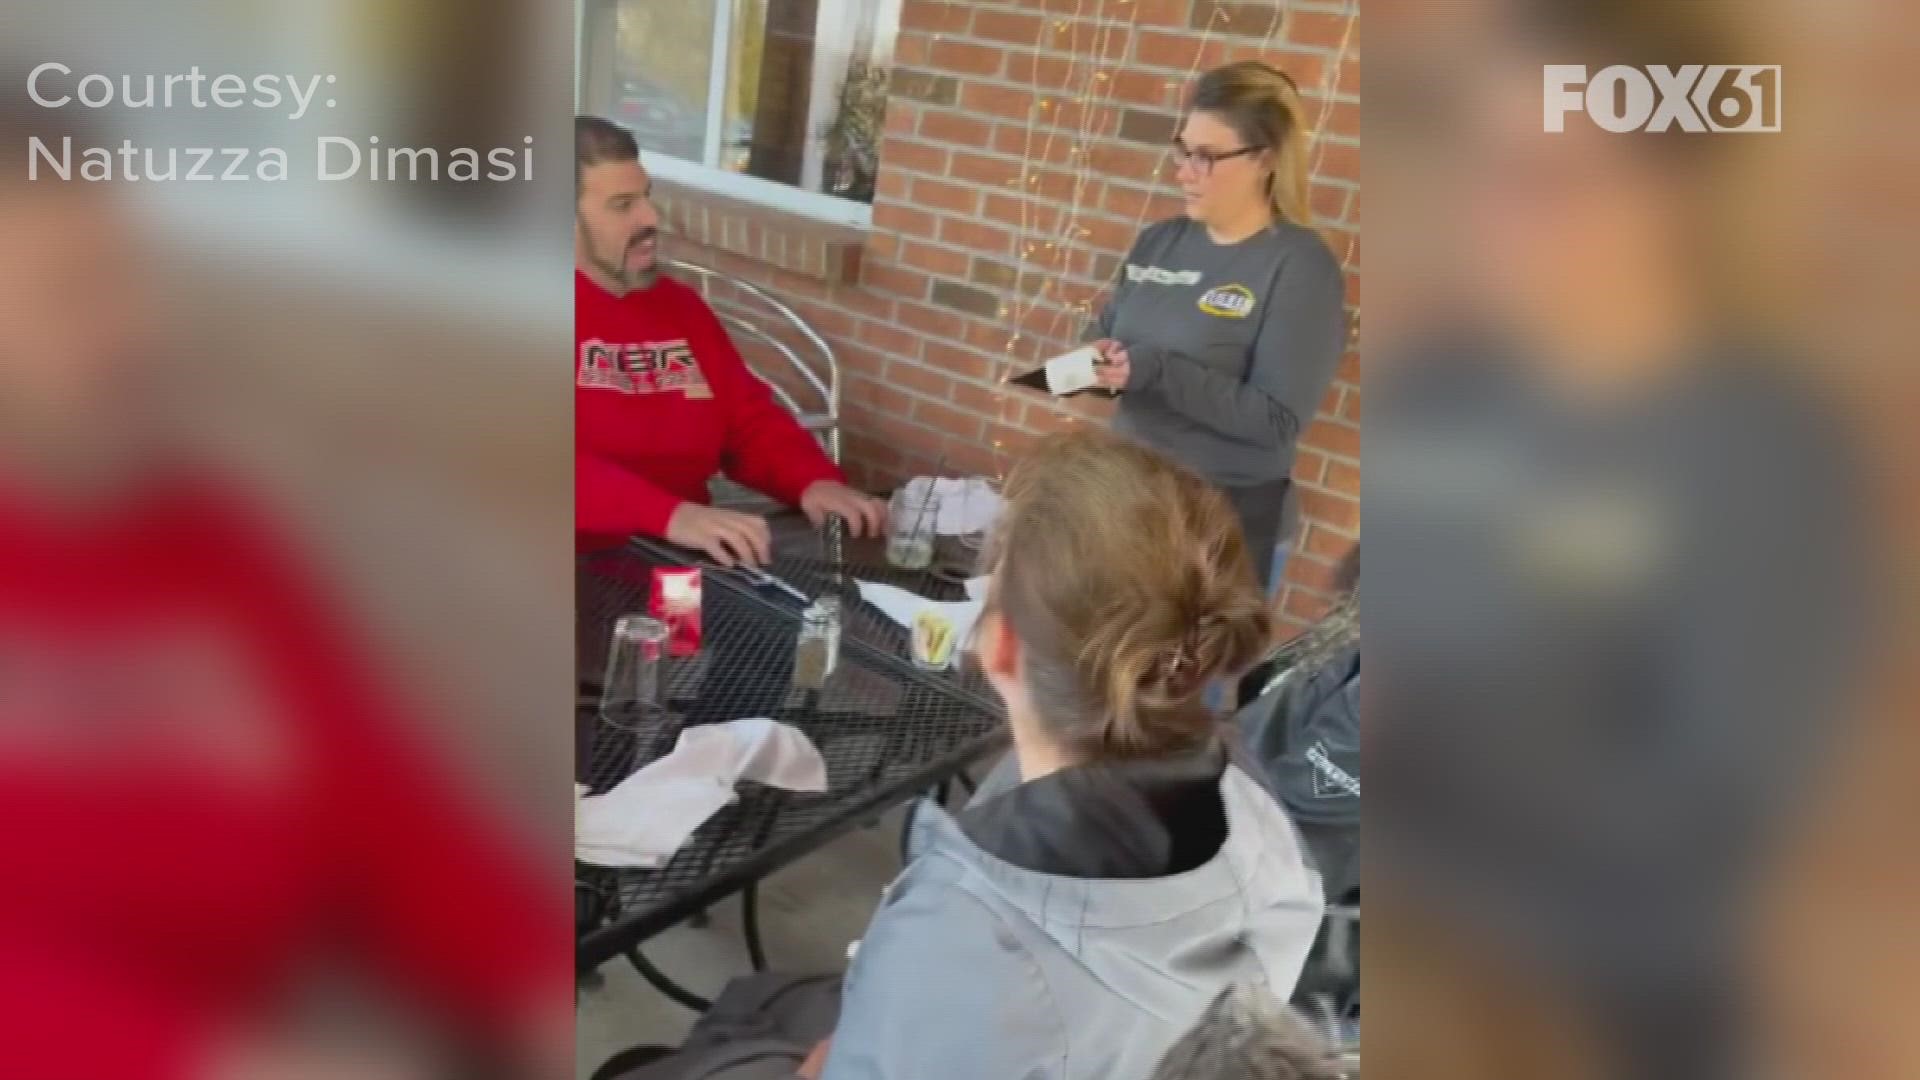 A group of strangers went out for lunch at a Prospect restaurant Sunday to not only get a good meal but to help a waitress in need this holiday season.